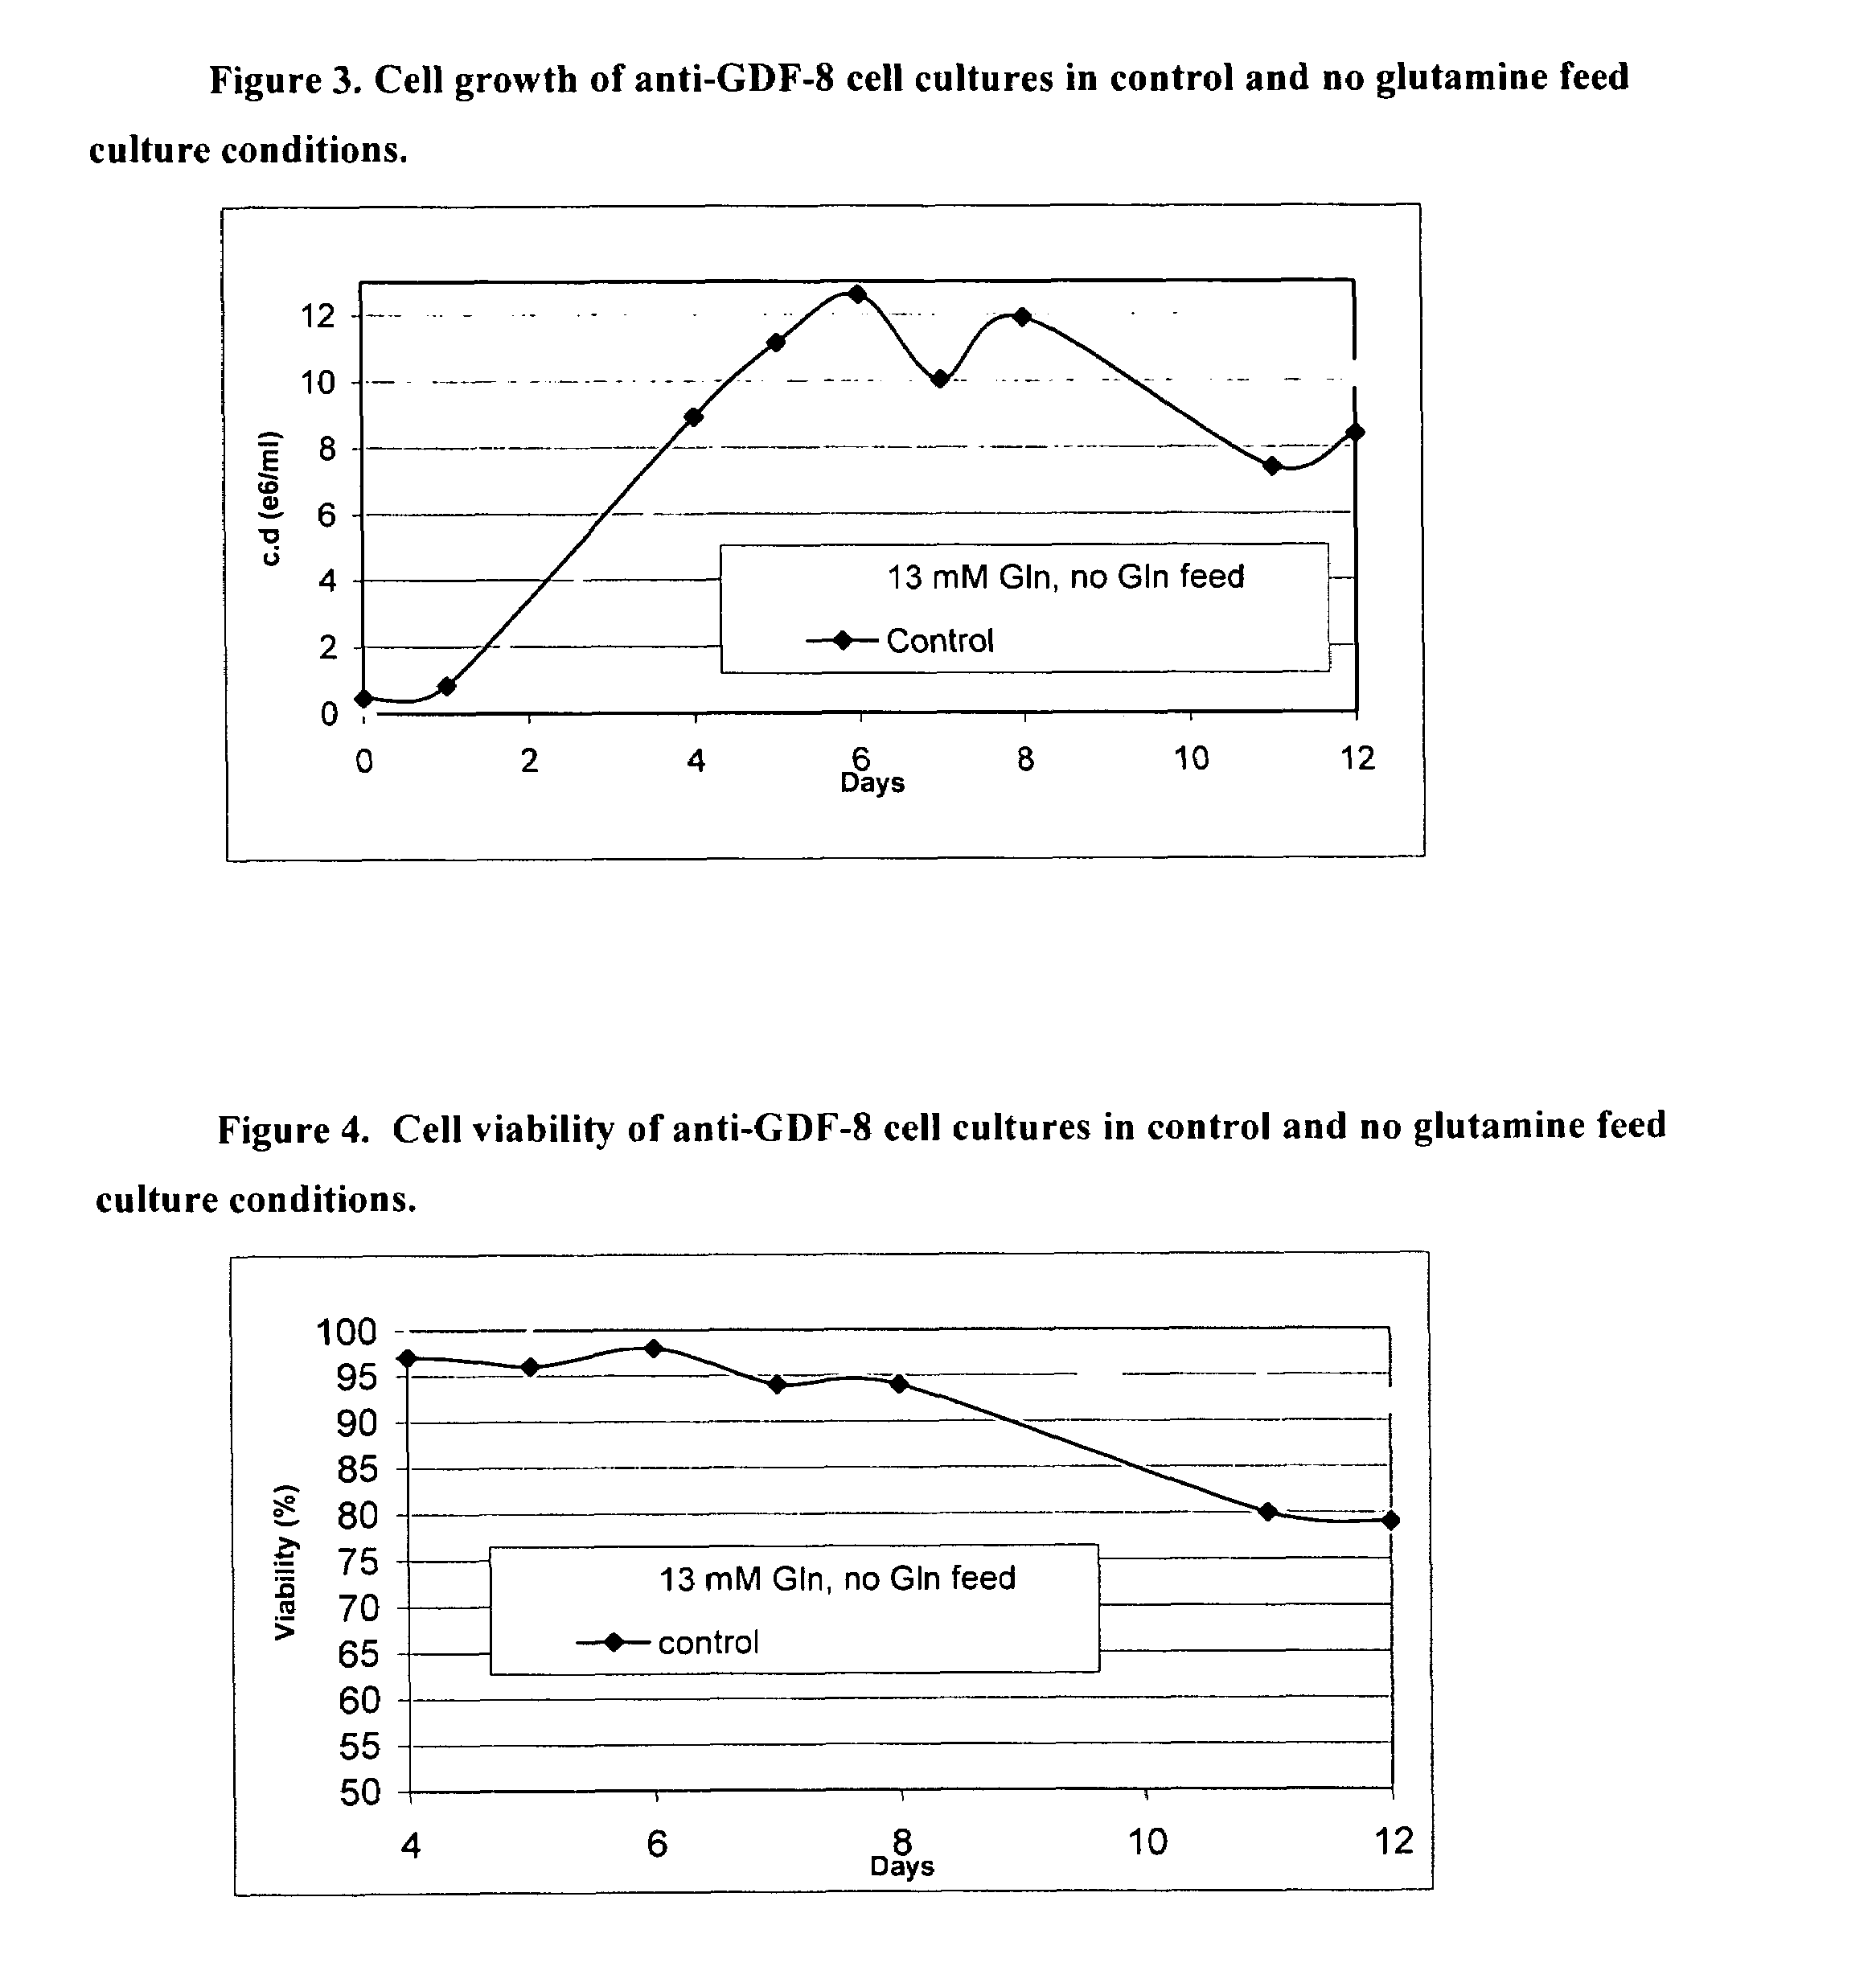 Production of TNFR-Ig